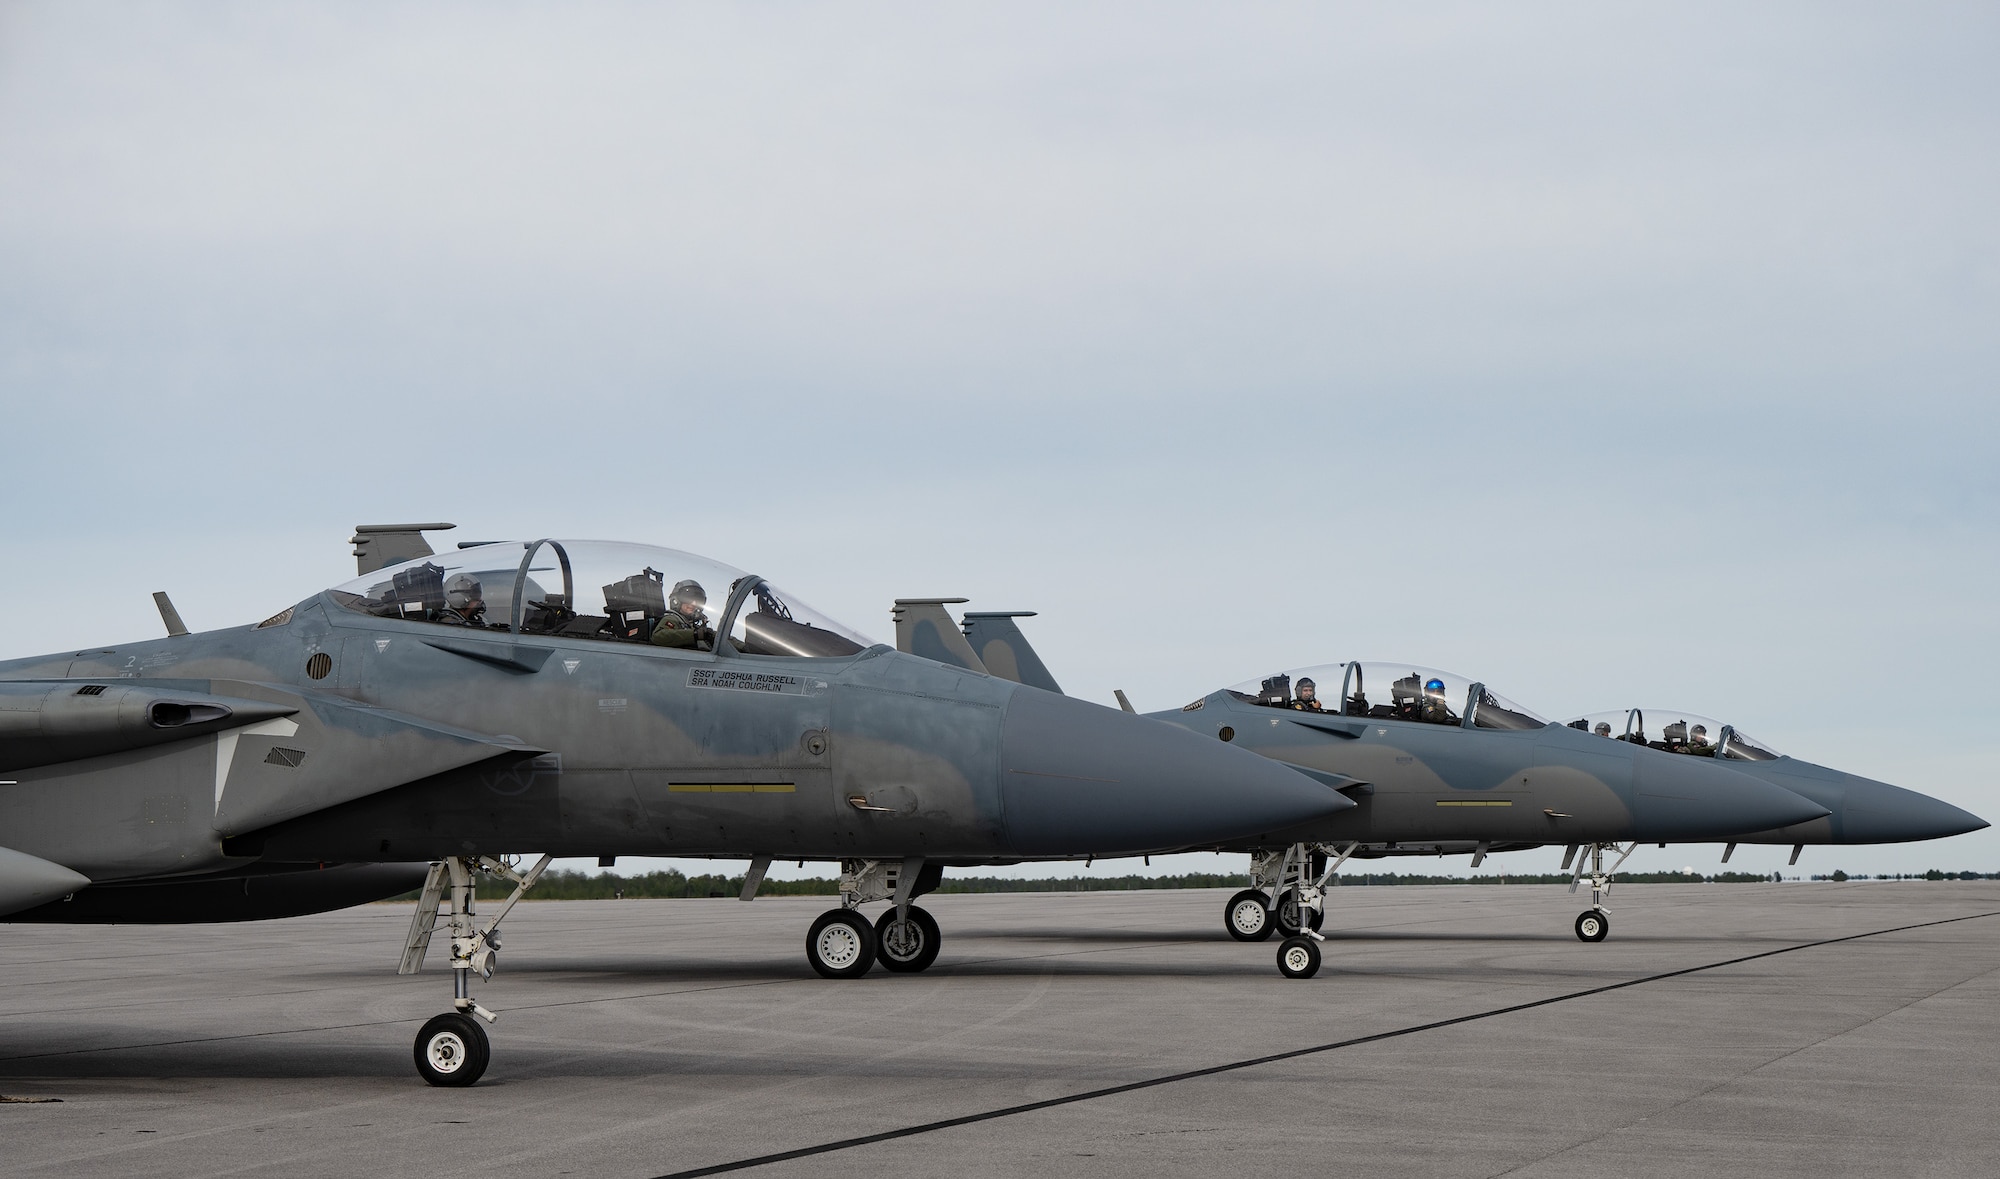 Staggered fighter jets rest on the flight line.